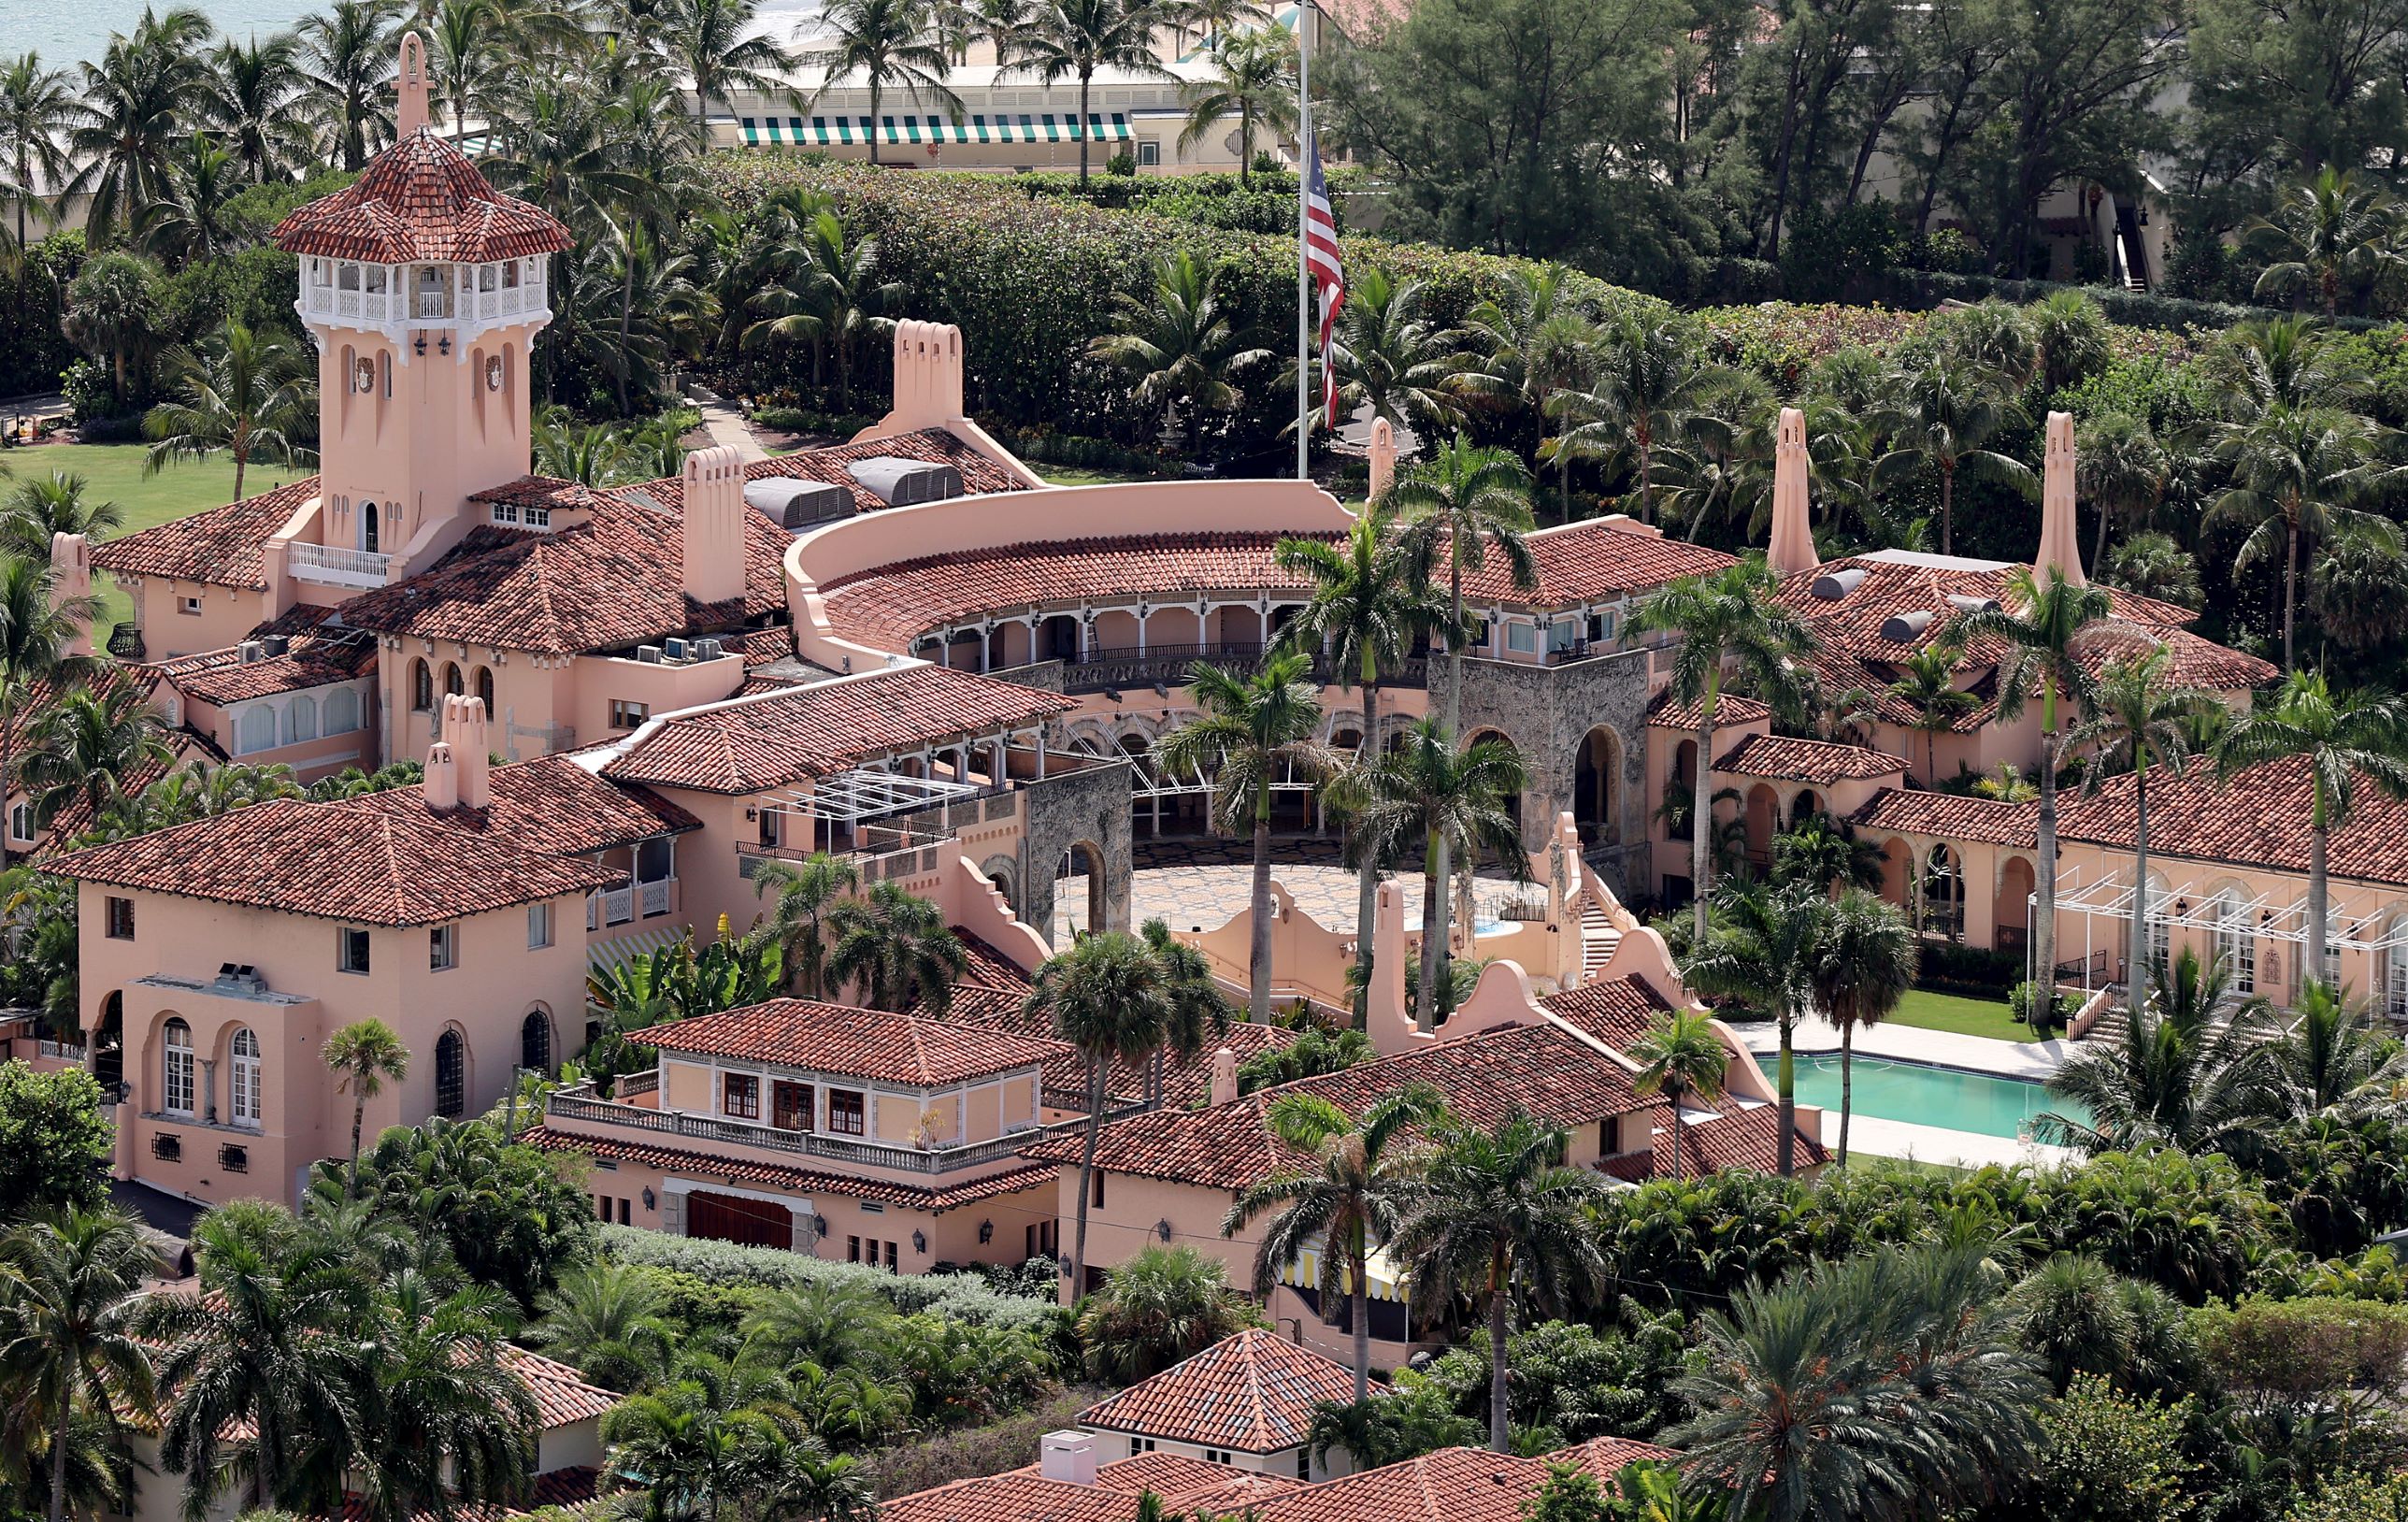 Department of Justice Seeks Another Delay in Turning Over Documents From Mar-a-Lago to Trump